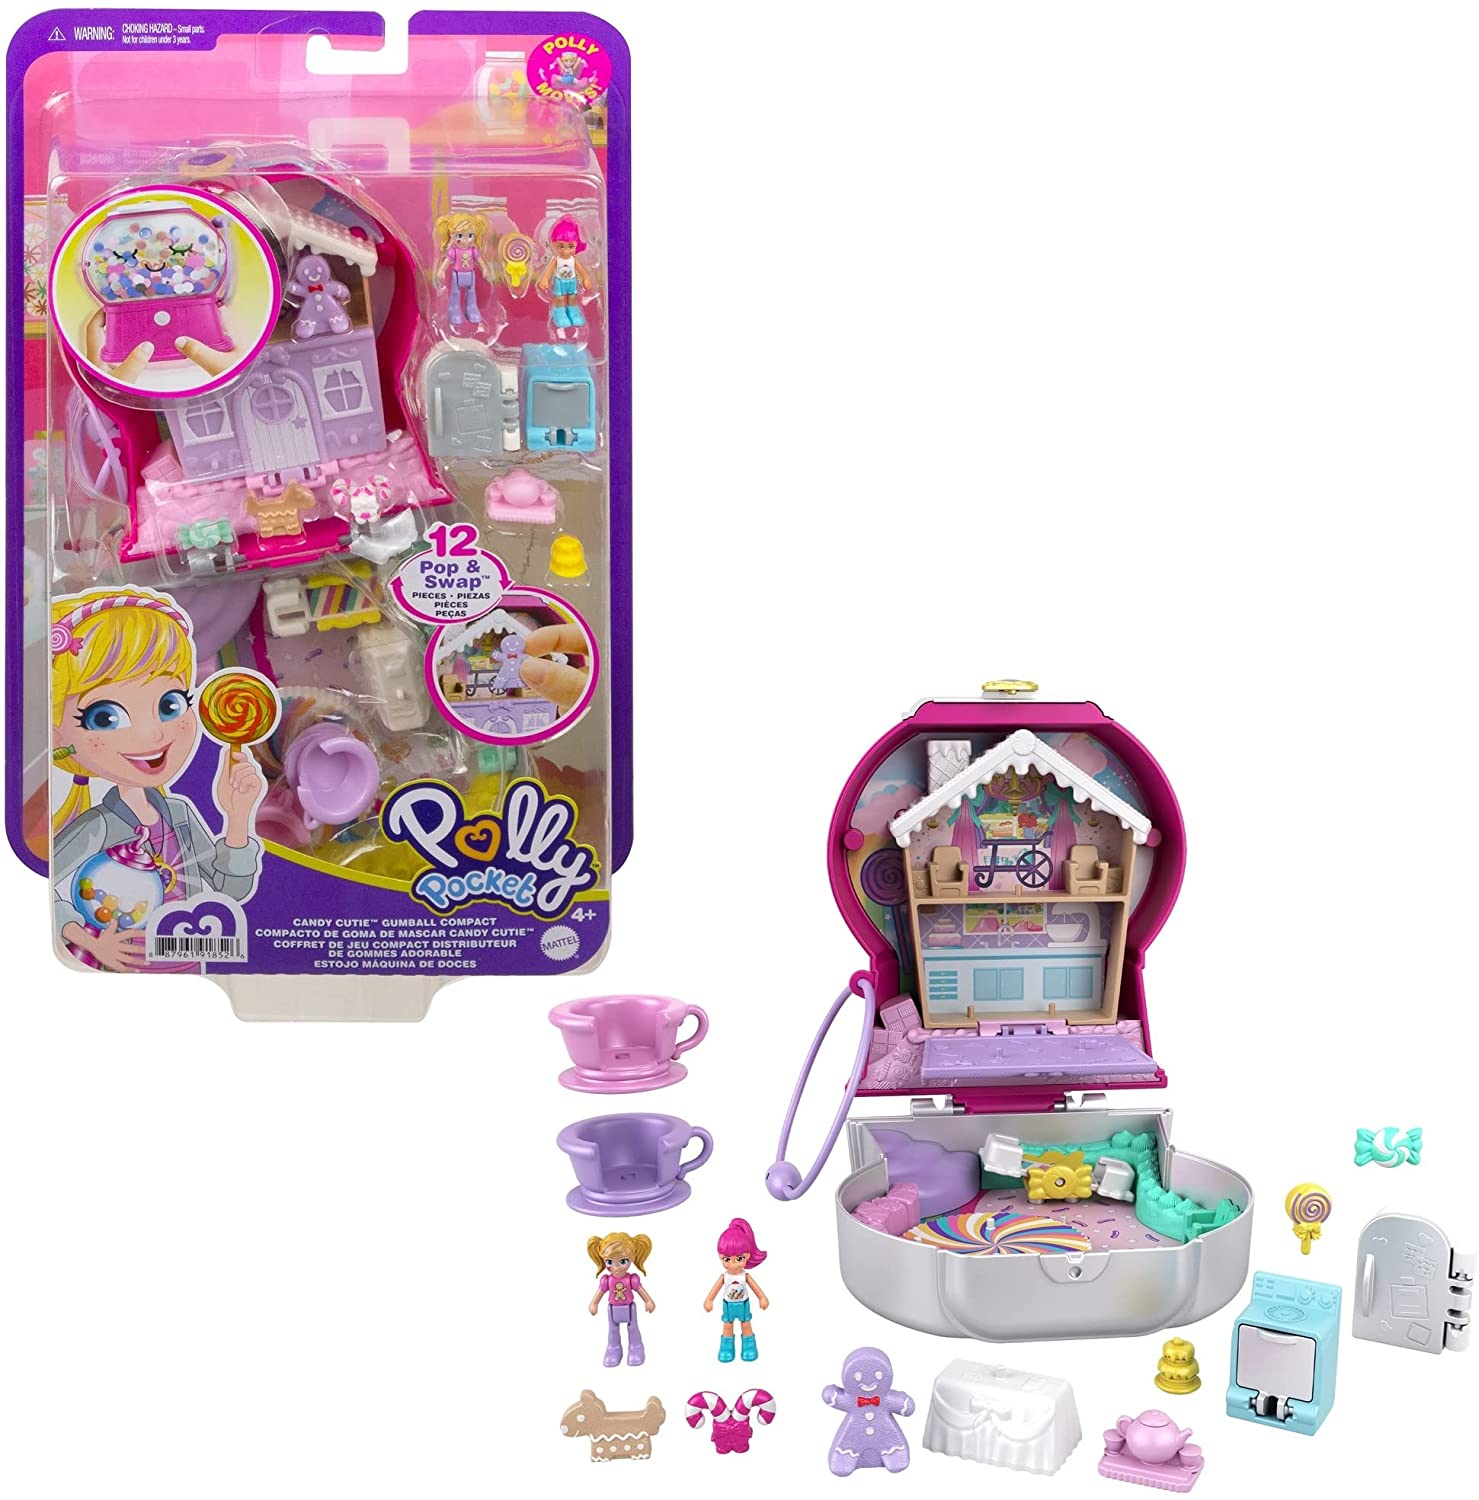 Polly Pocket Corgi Cuddles Compact with Pet Hotel Theme, Micro Polly &  Shani Dolls, 2 Dog Figures (Poodle with Hair & Husky) Fun - ToysChoose